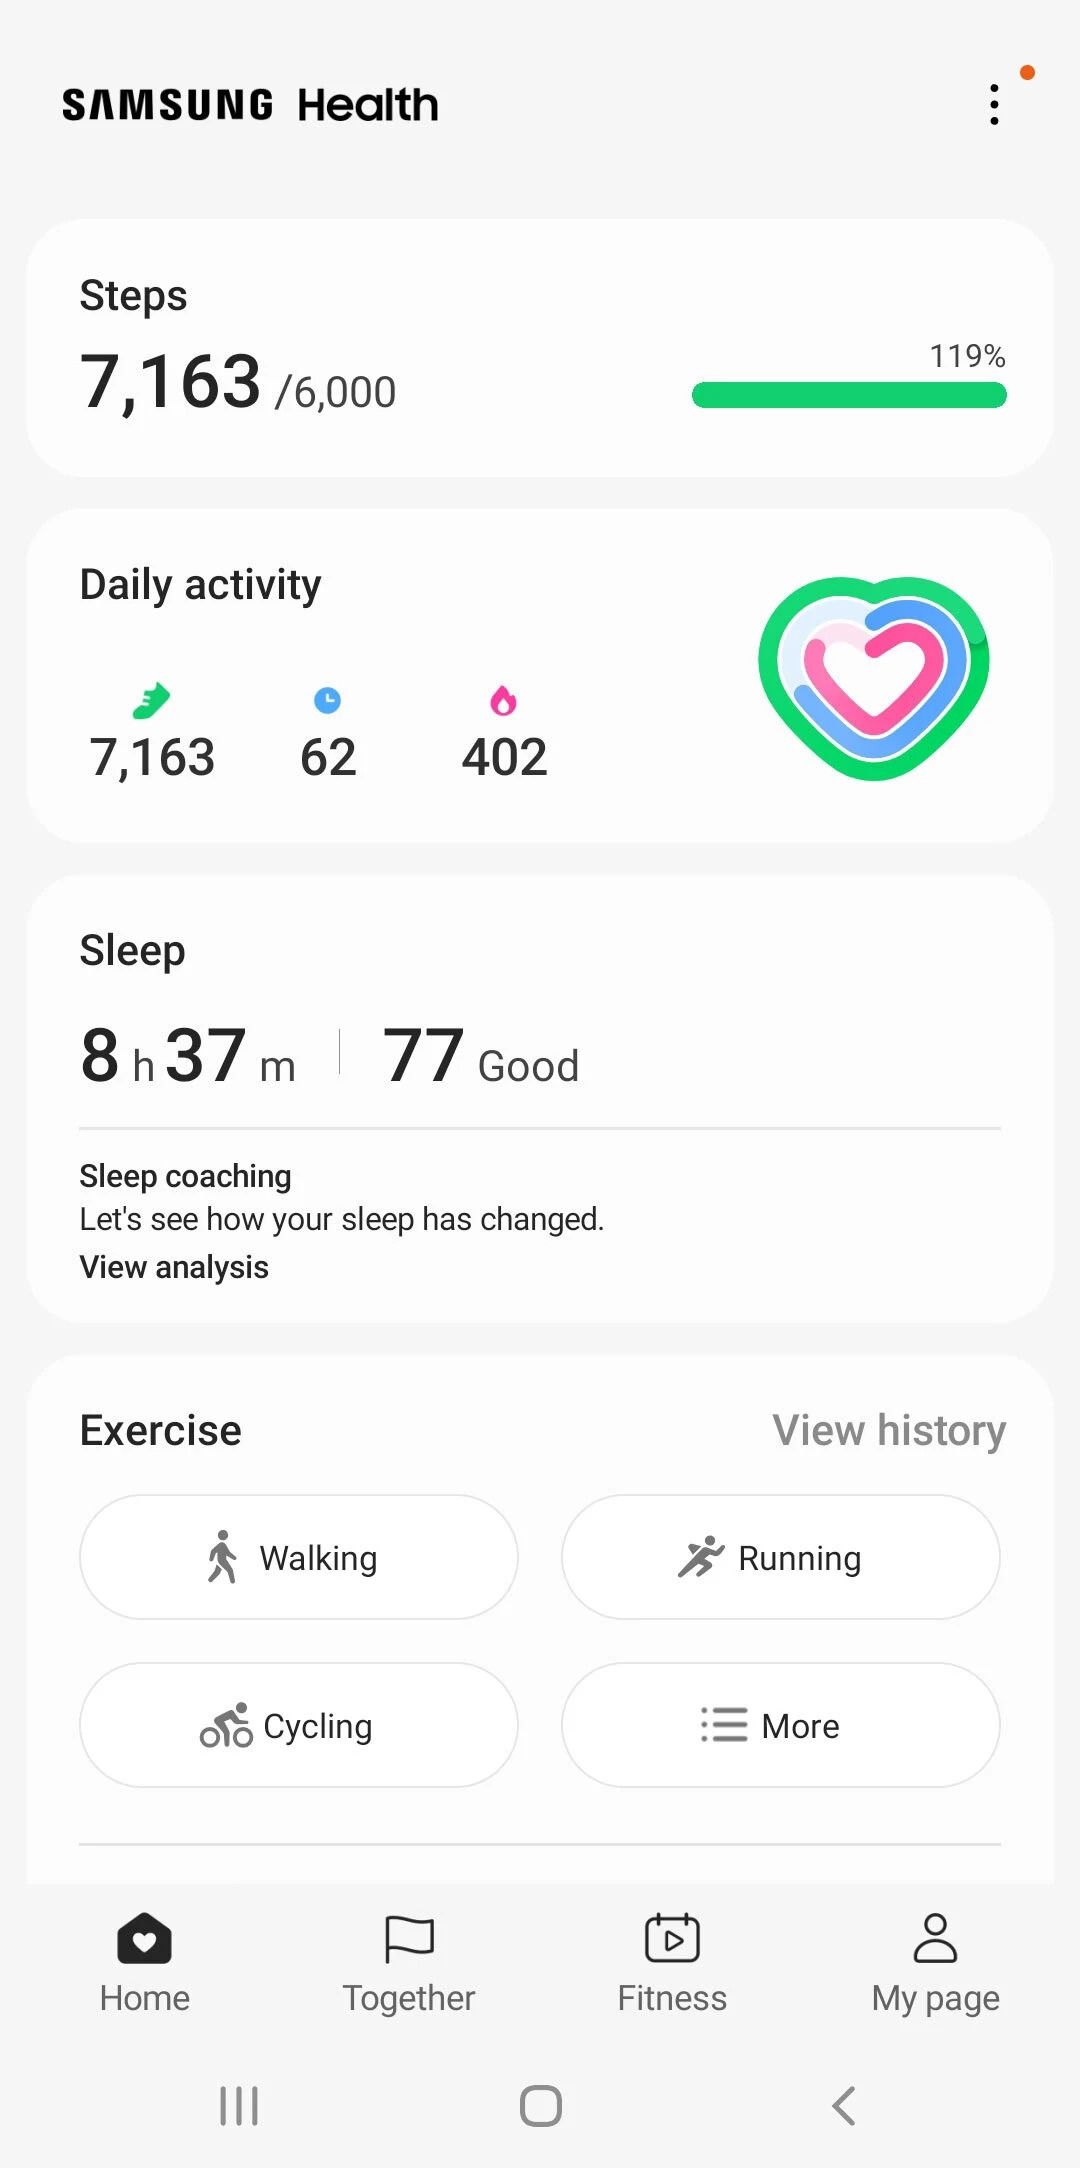 samsung health daily stats for sleep, steps and heart activity